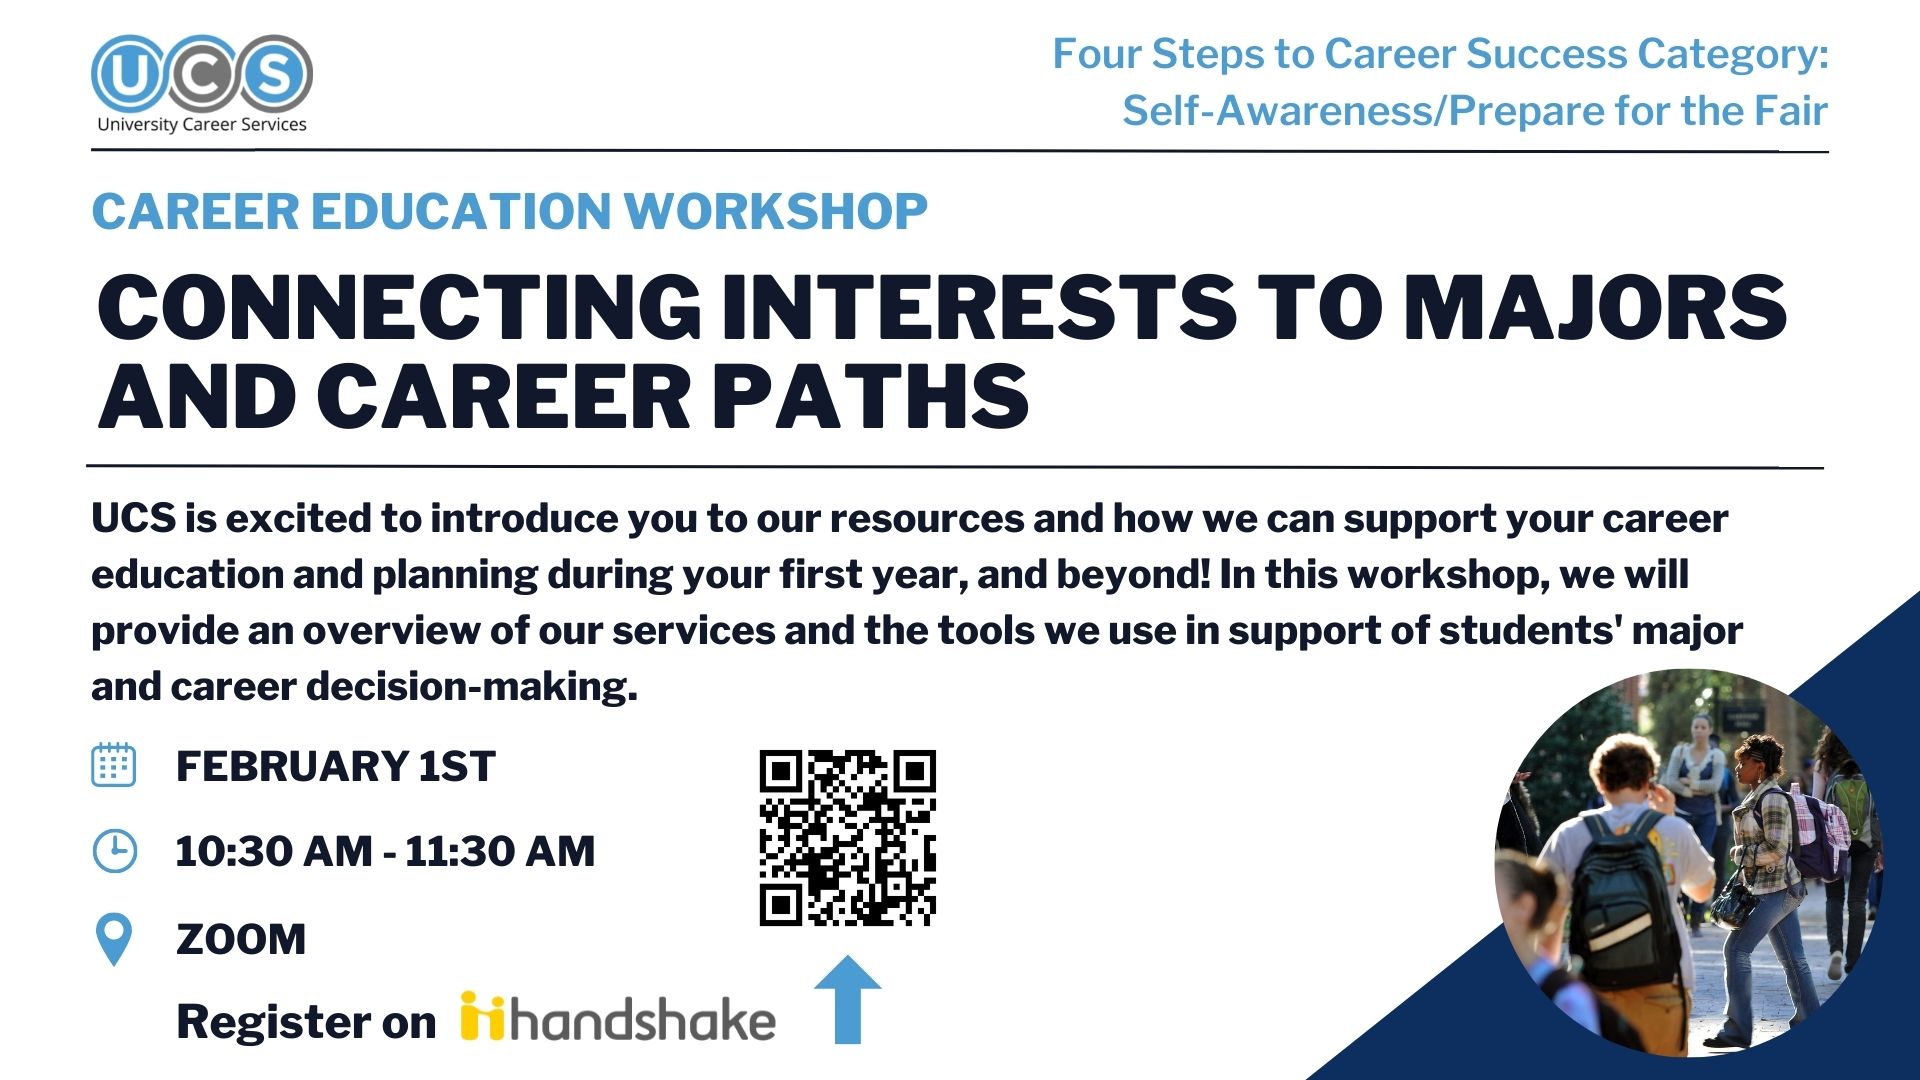 UCS is excited to introduce you to our resources and how we can support your career education and planning during your first year, and beyond! In this workshop, we will provide an overview of our services and the tools we use in support of students' major